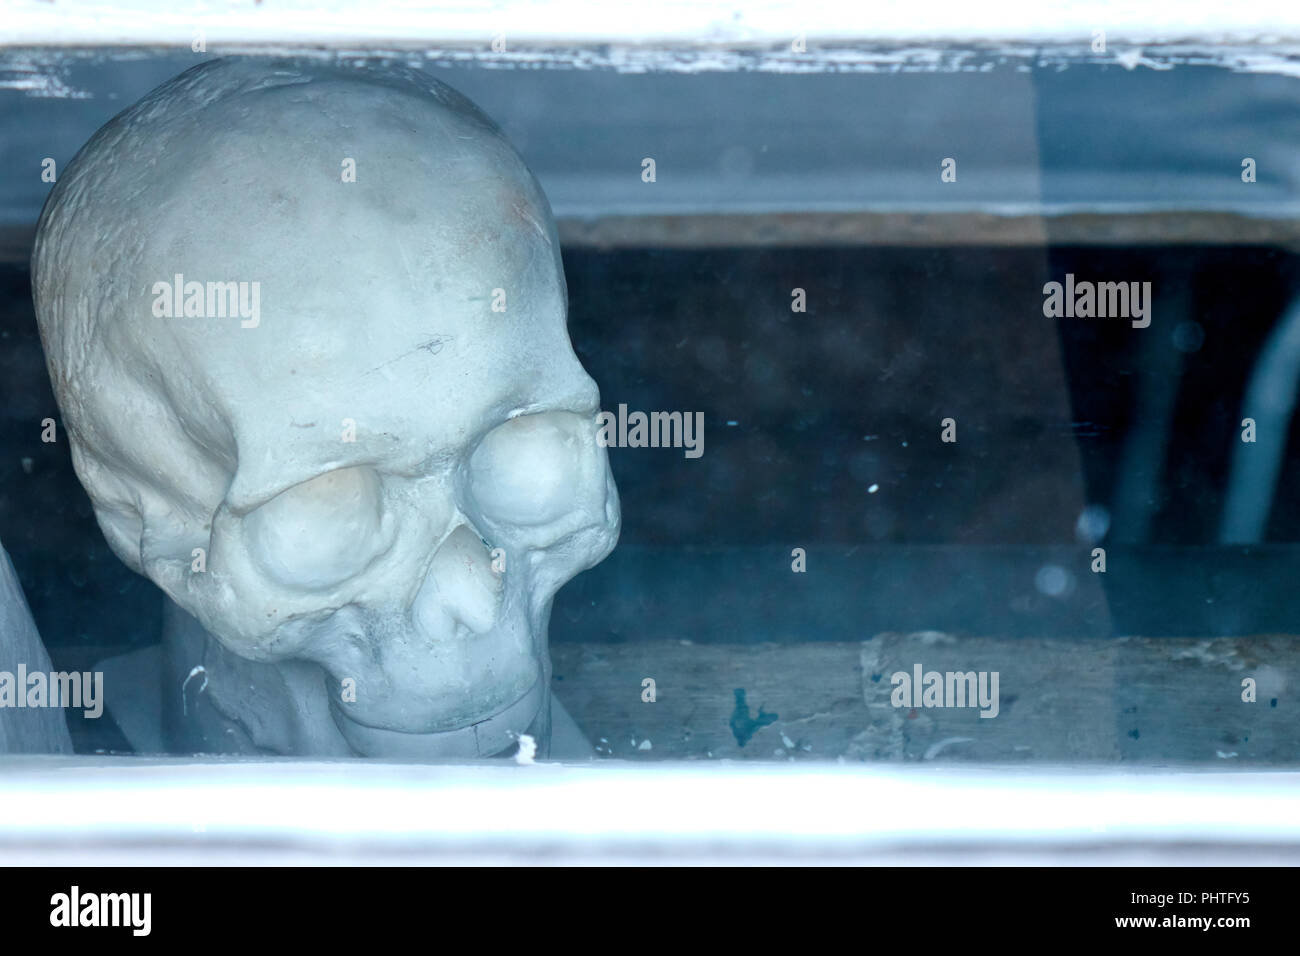 Human skull made of gypsum for educational purposes behind glass art and medical school anatomy model Stock Photo